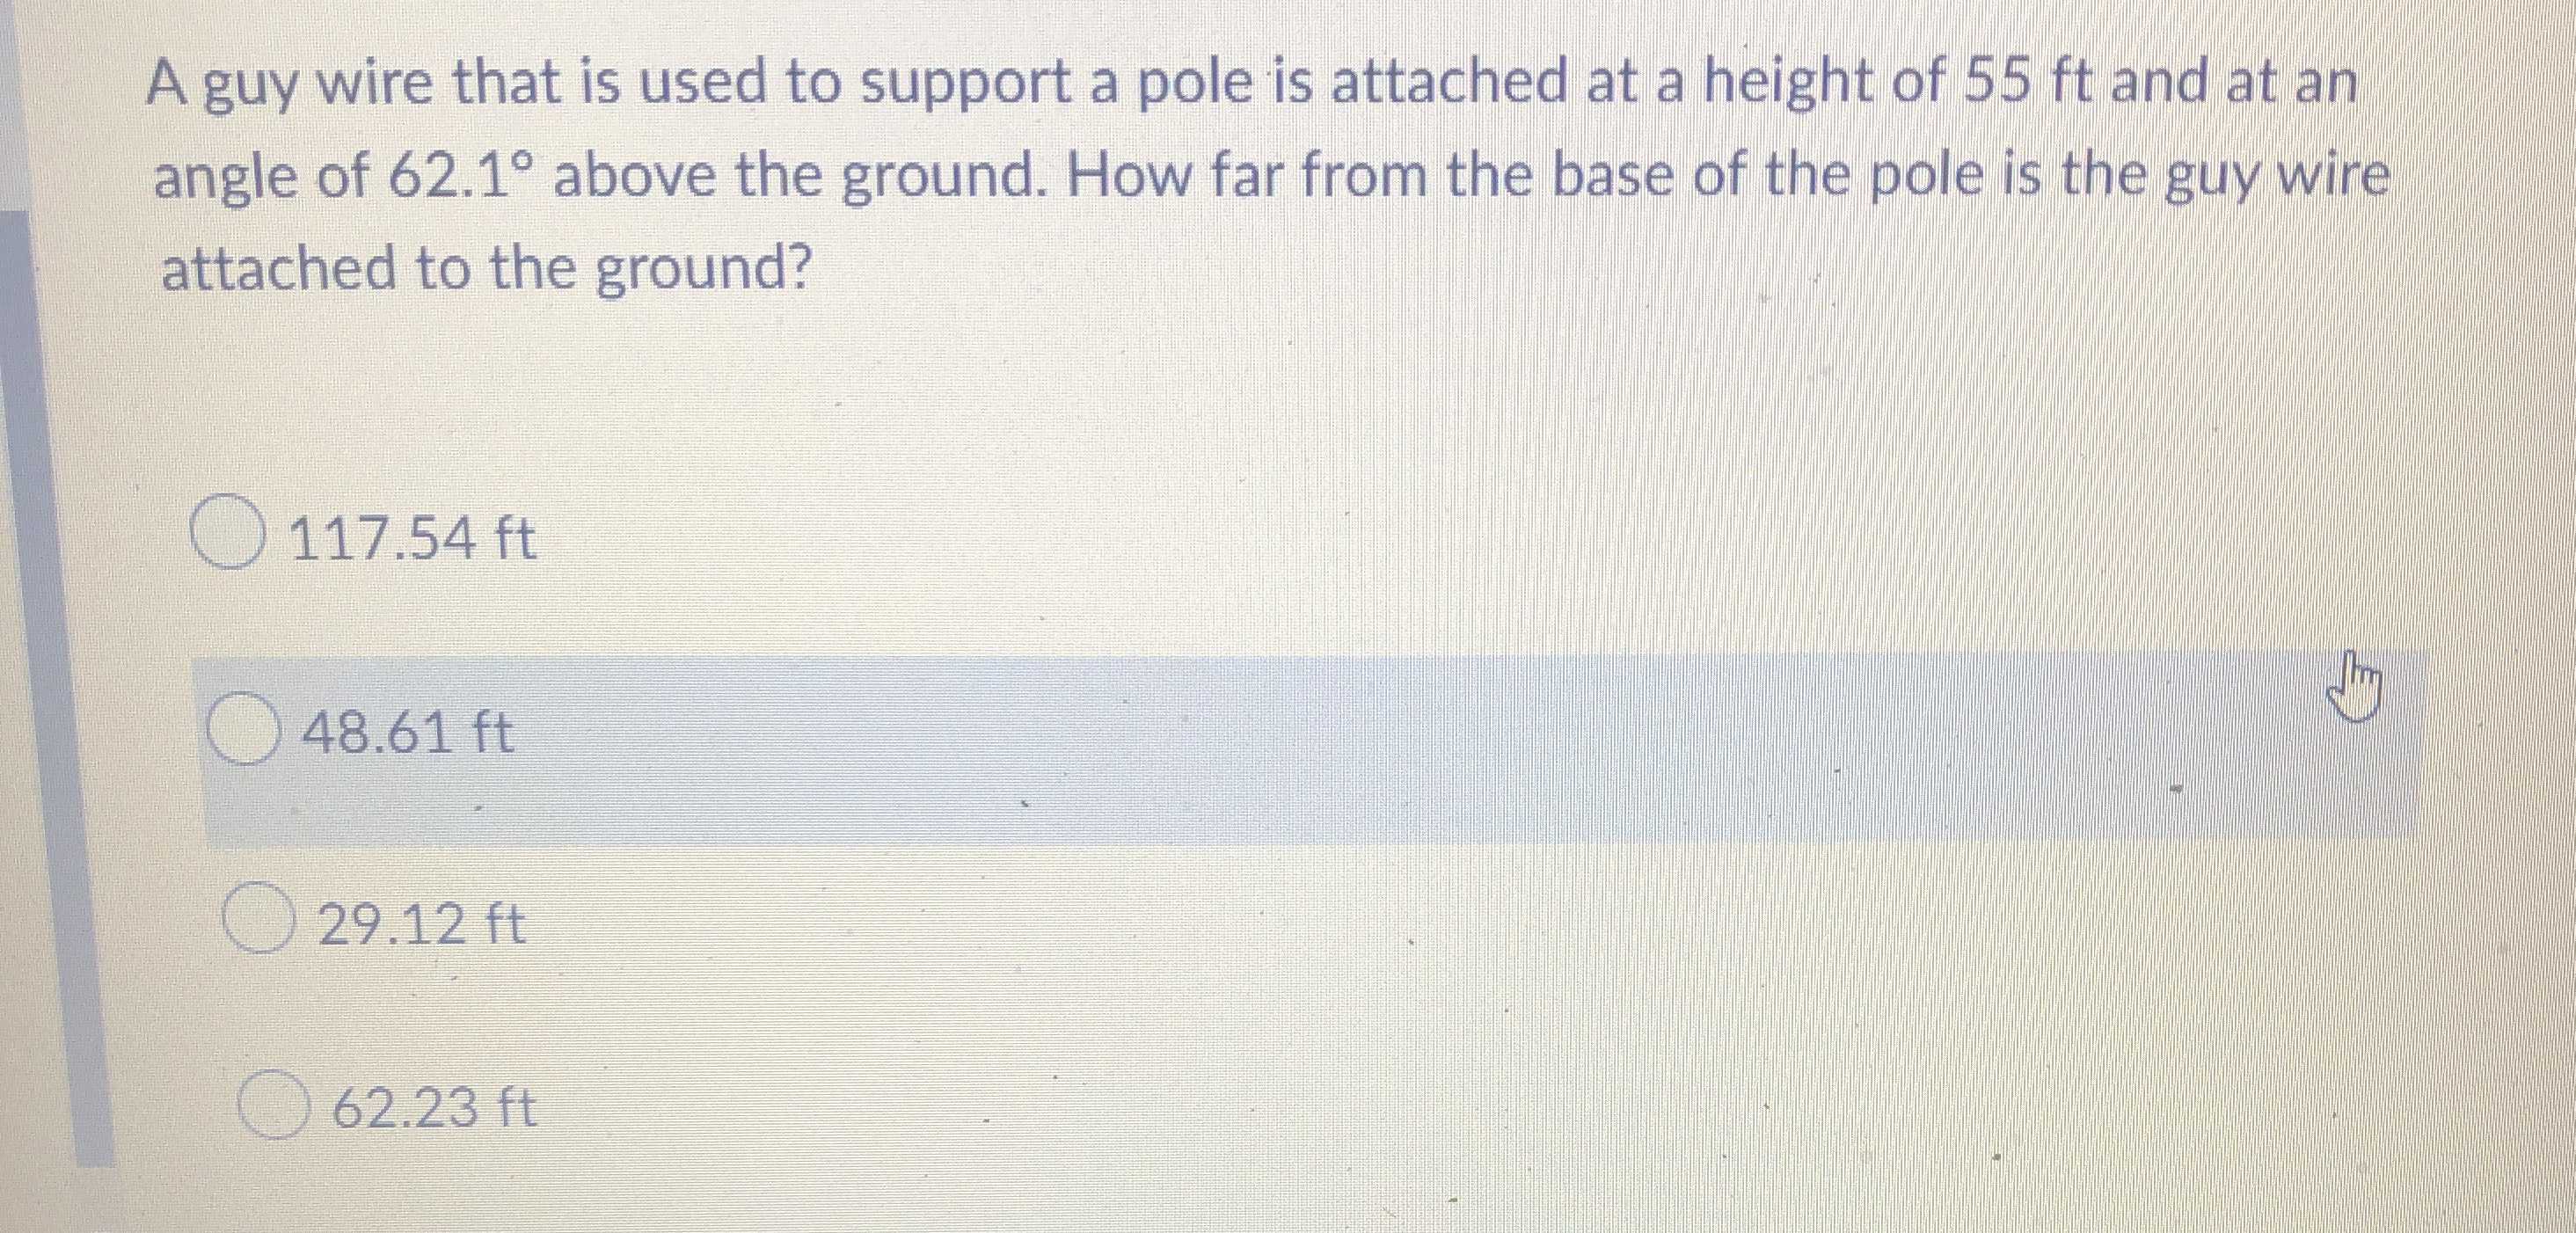 A guy wire that is used to support a pole is attac...